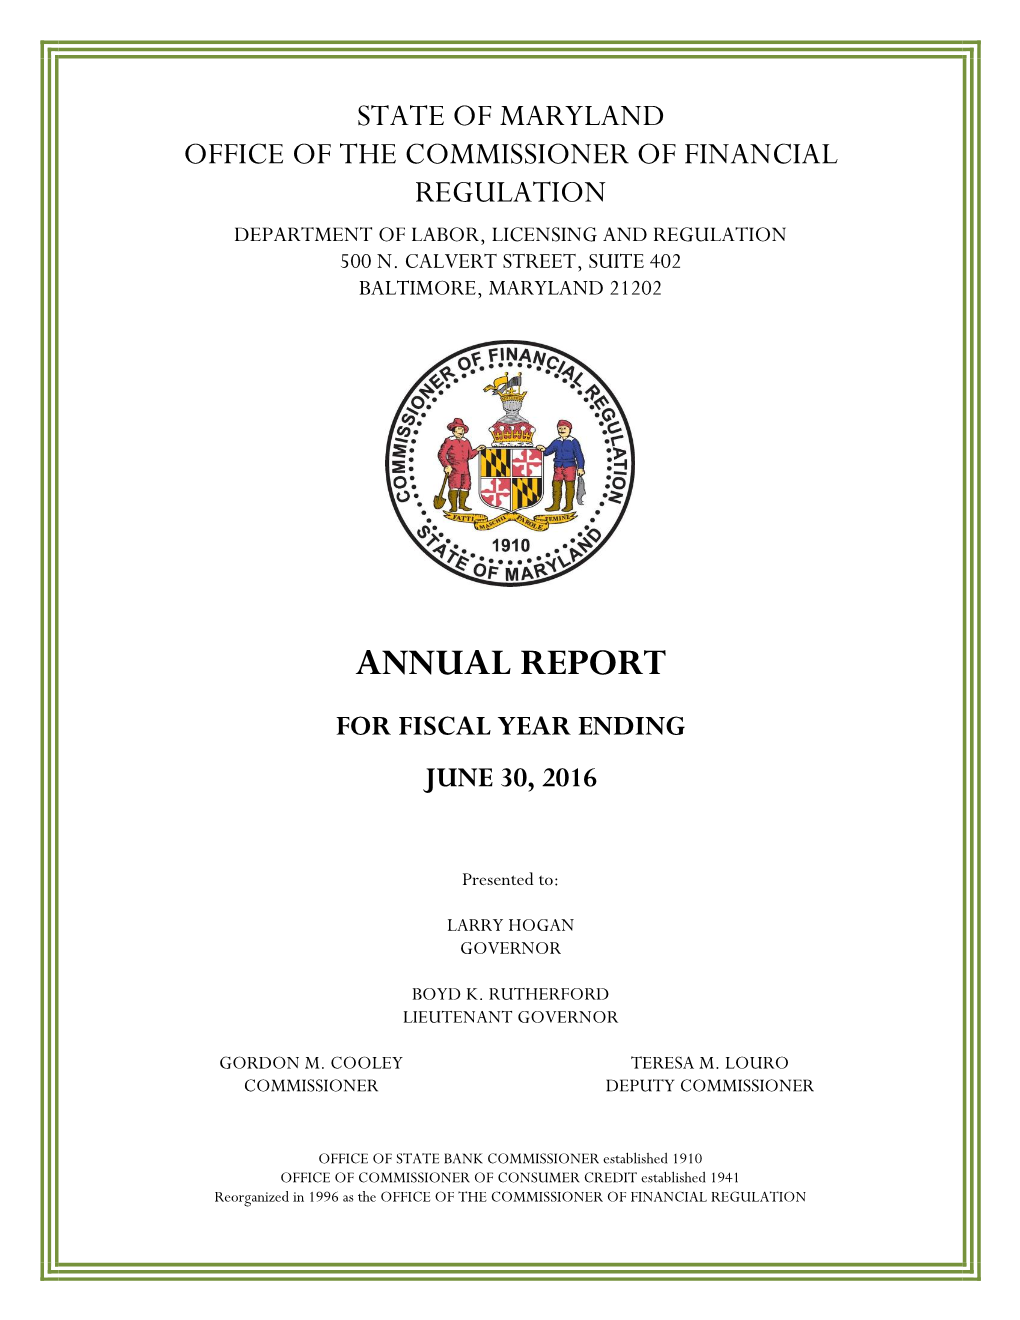 Annual Report for Fiscal Year Ending June 30, 2016